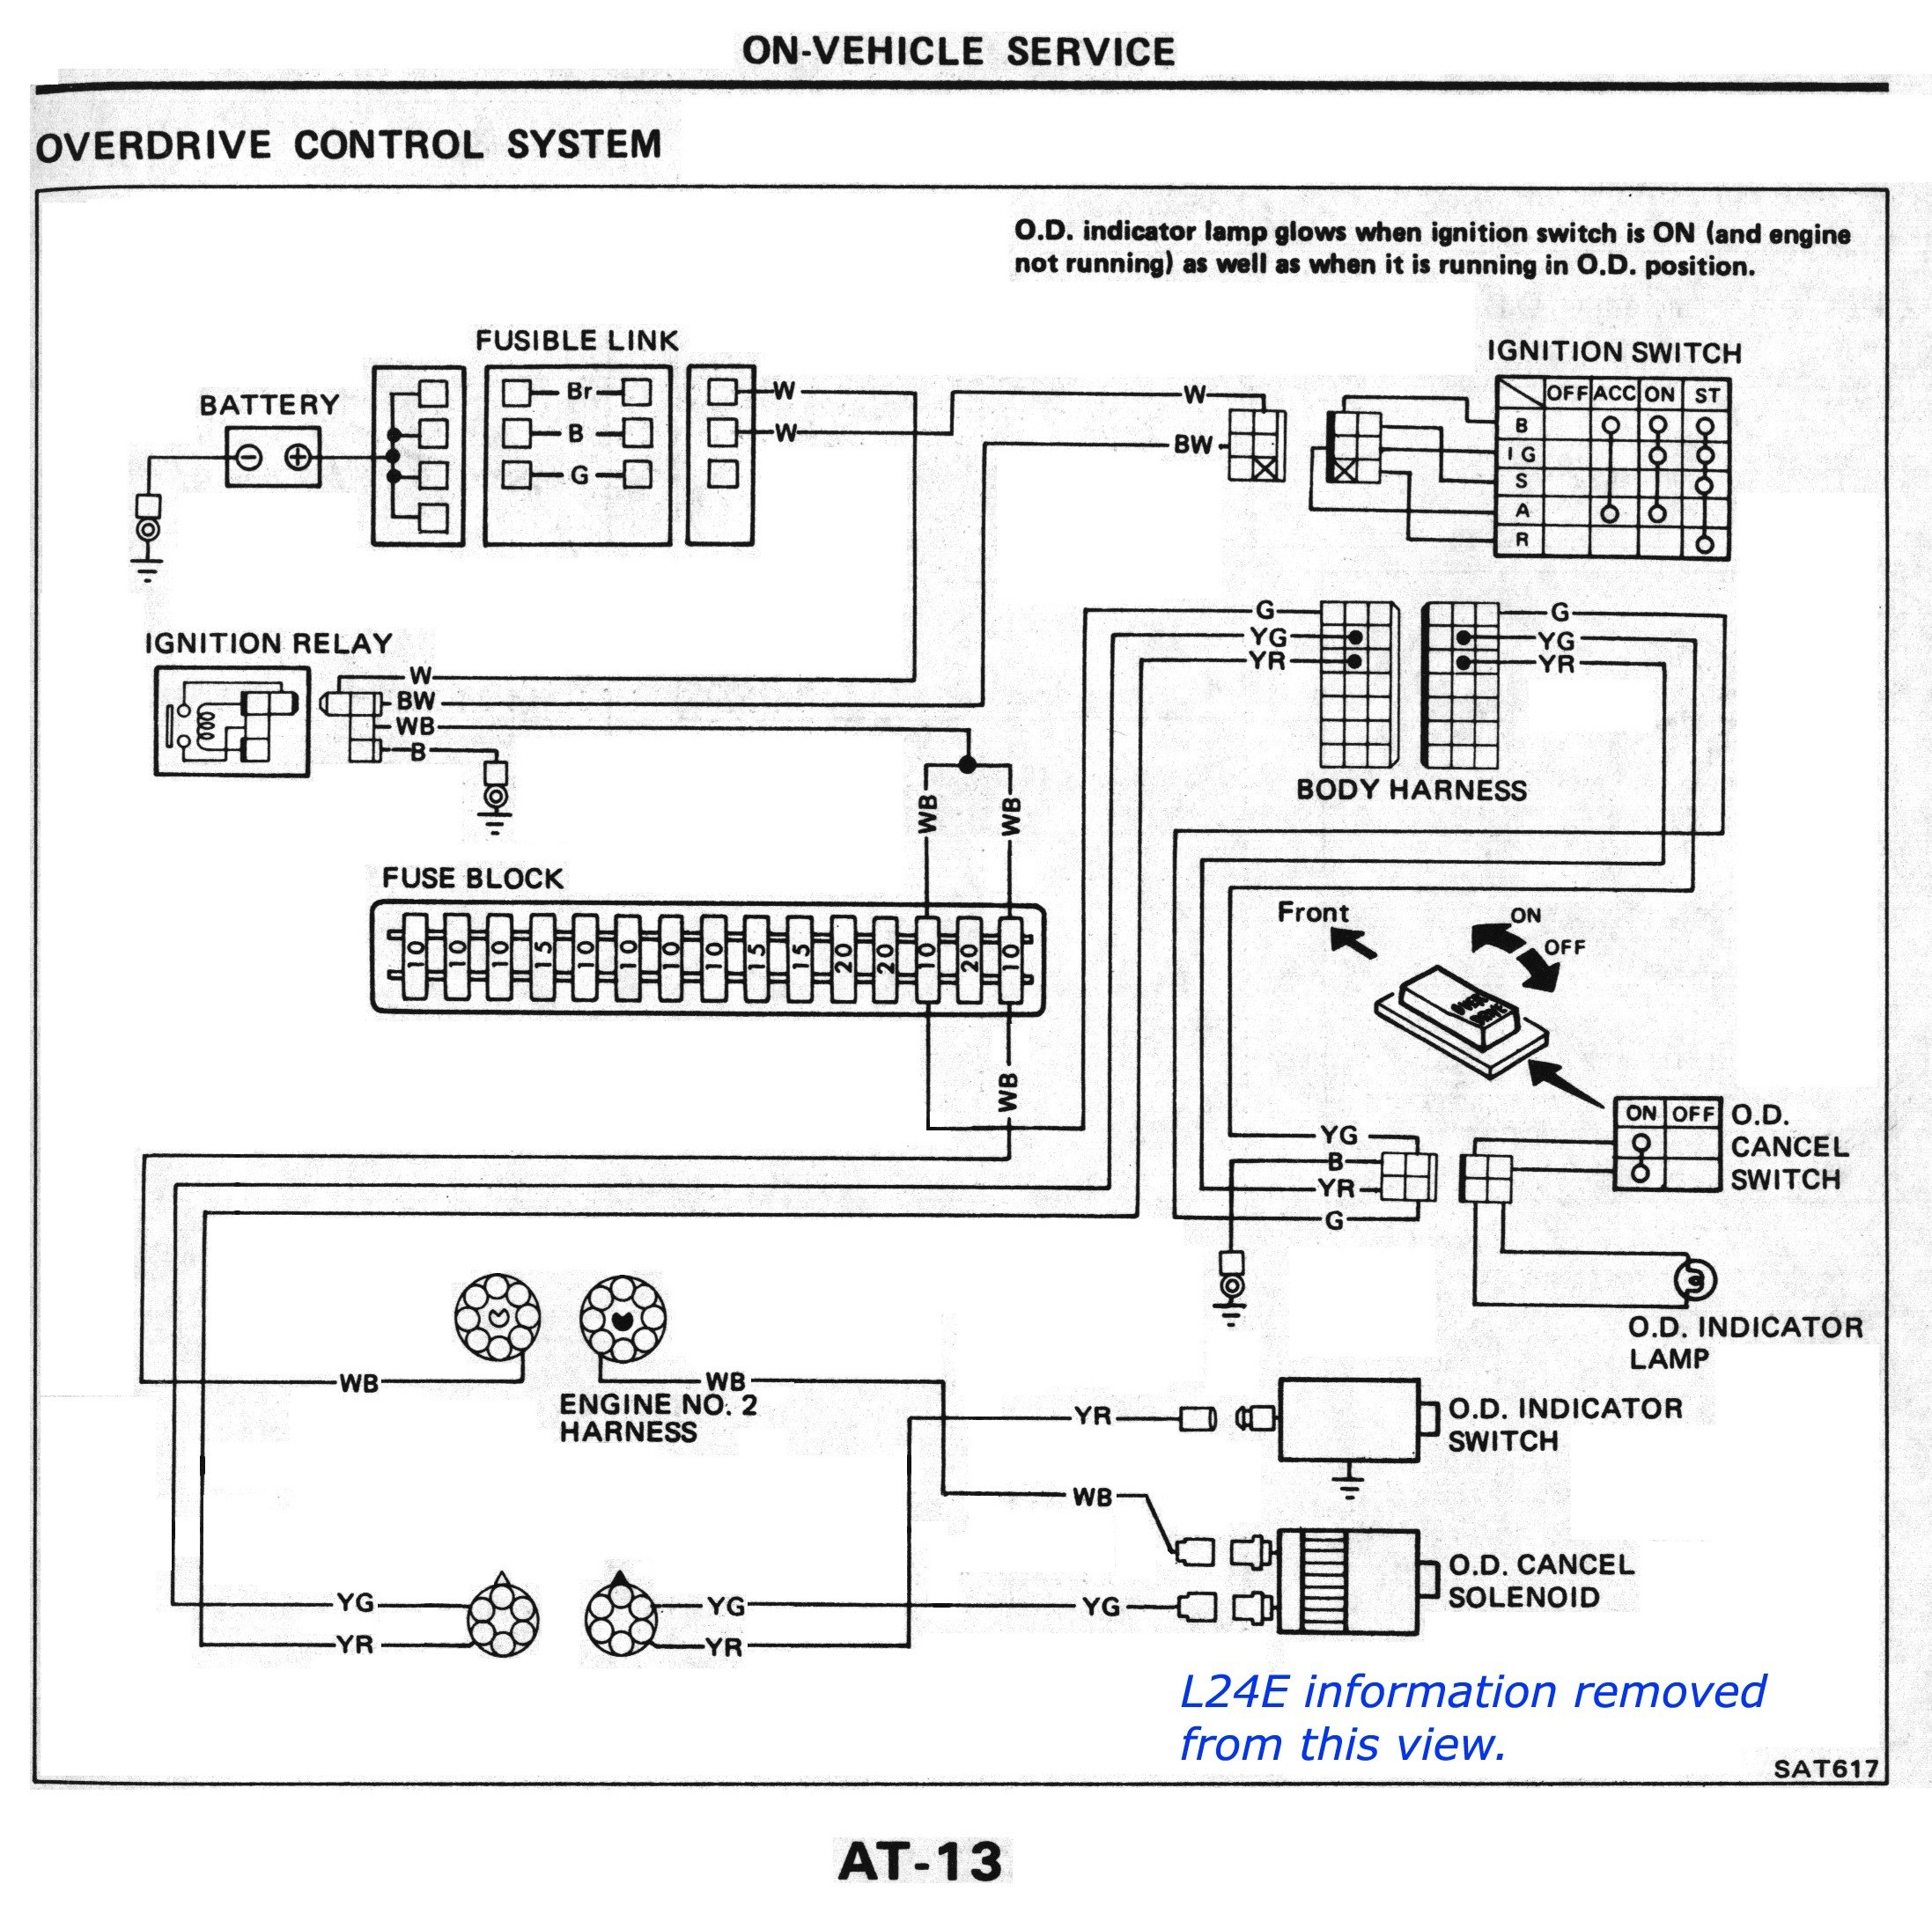 End Of Line Switch Wiring Diagram 55